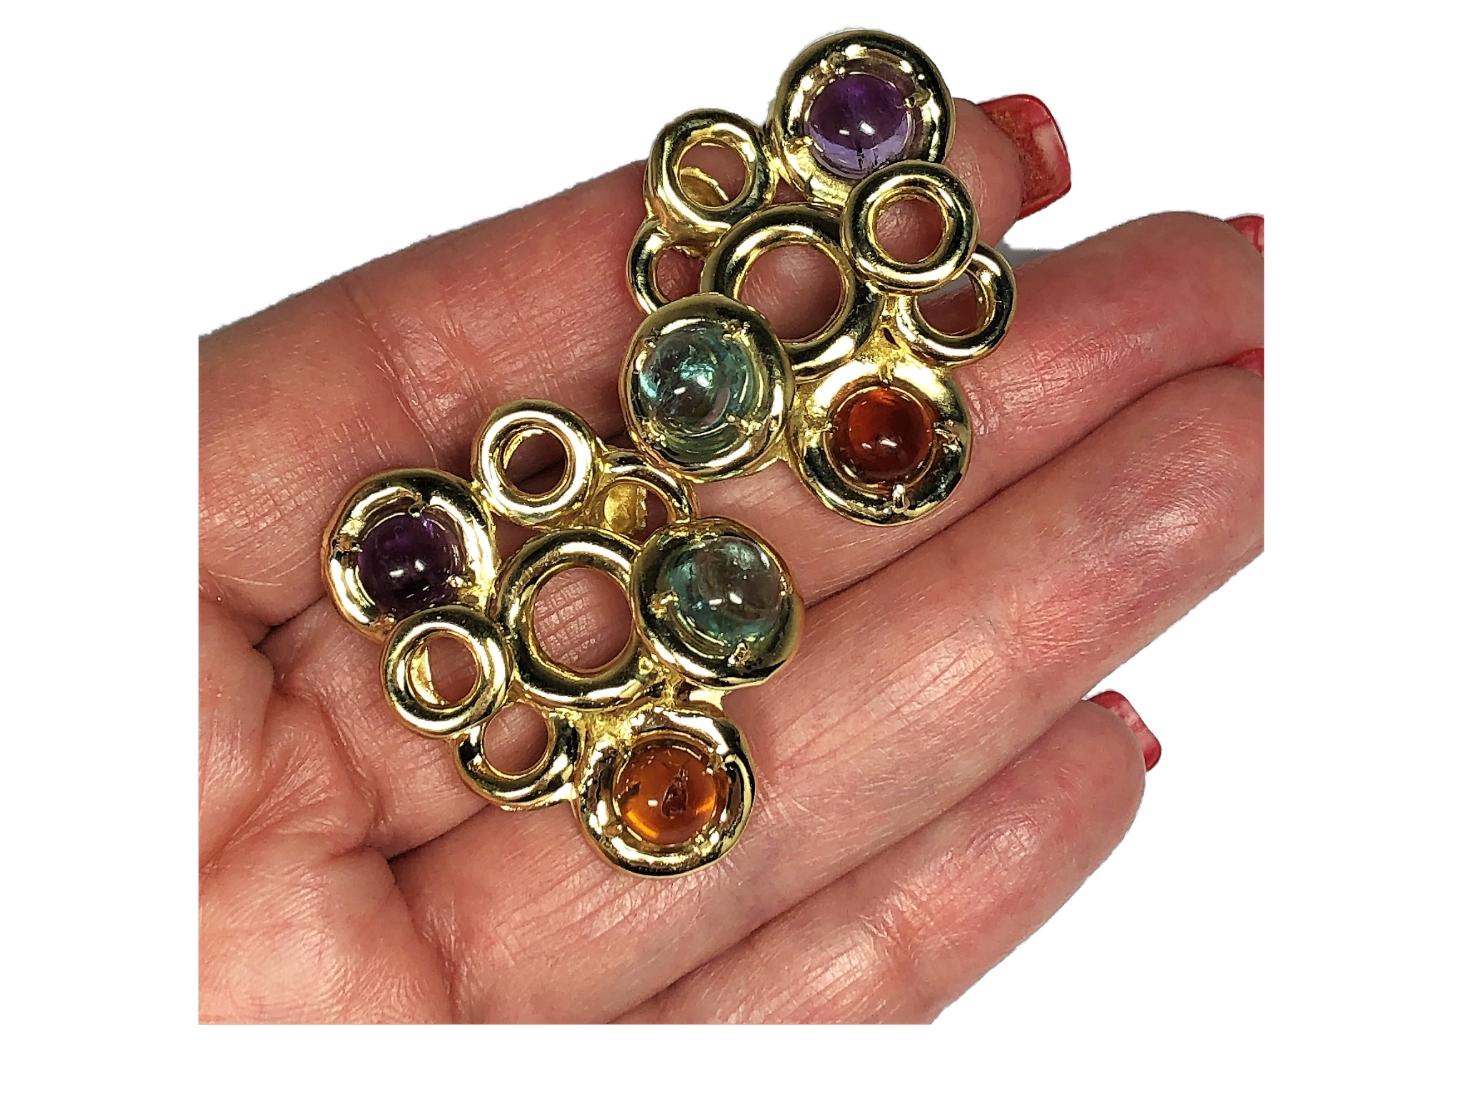 Women's 1960s Clip-On Gold Earrings with Cabochon Aquamarine, Amethyst and Citrine